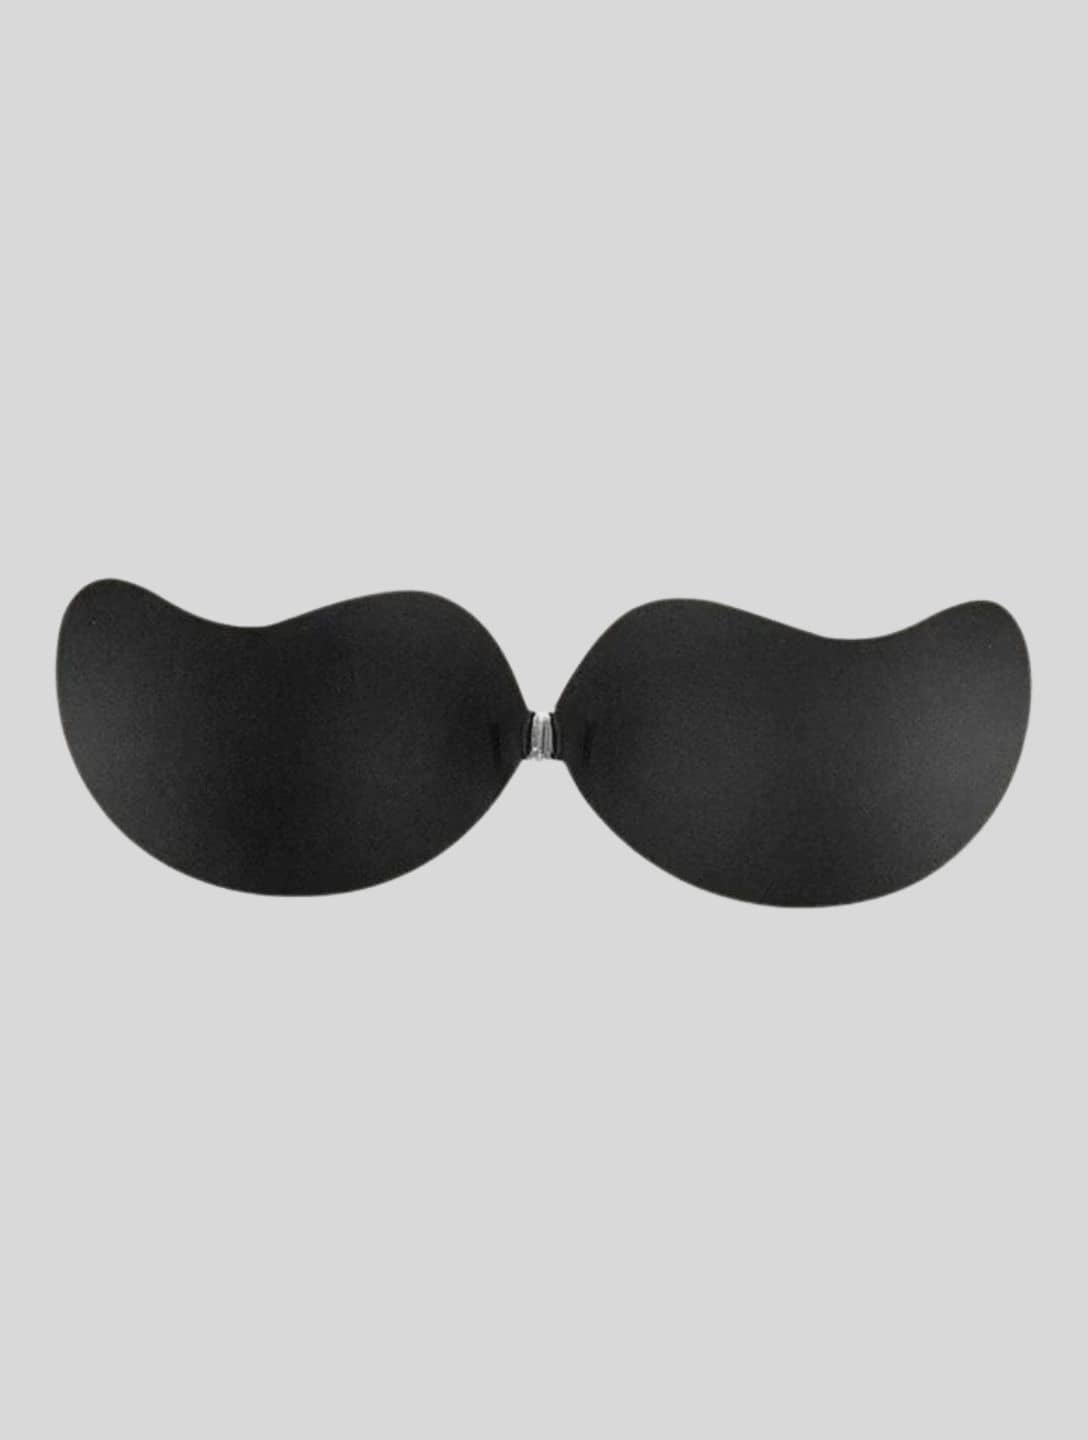 HHYSPA Button Up Strapless Bra for Women, Push Up Strapless Front